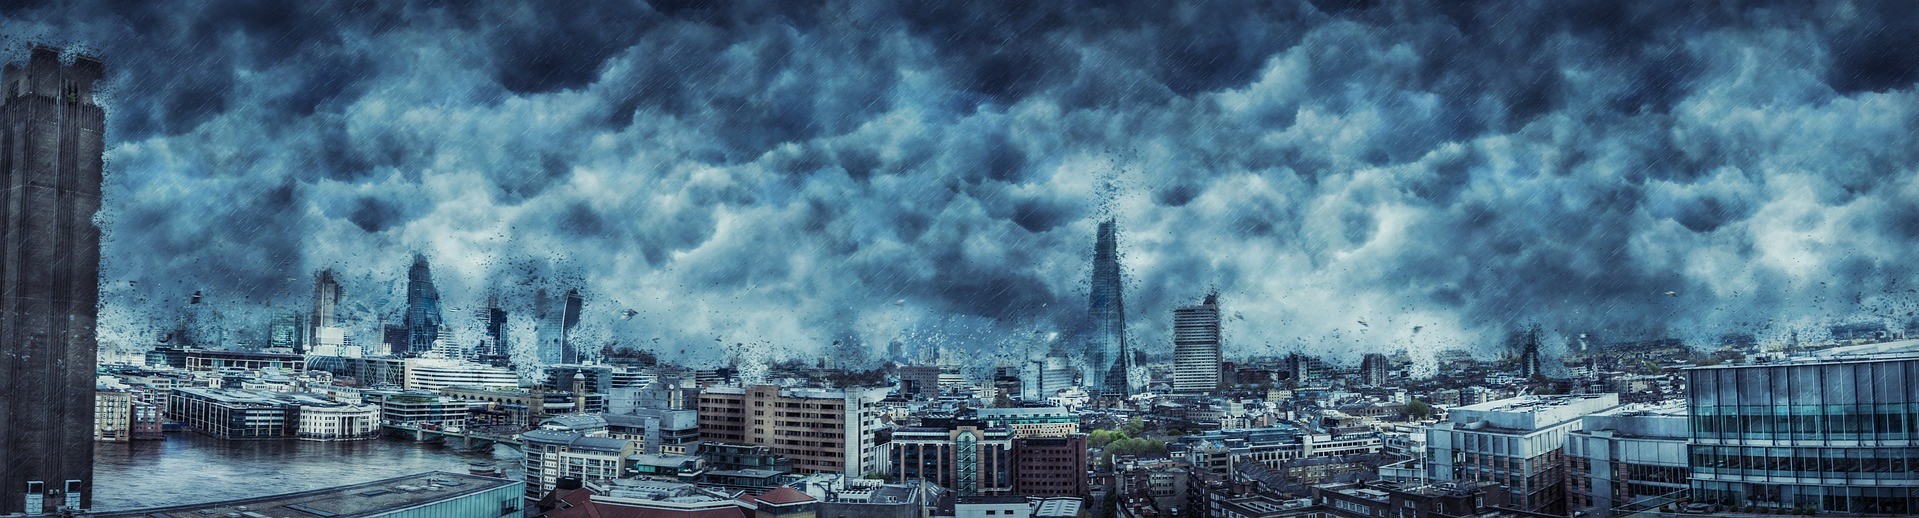 An painting of a scenary depicting a city in chaos and destruction due to climate change. Dark clouds are forming and coming forth in the sky.